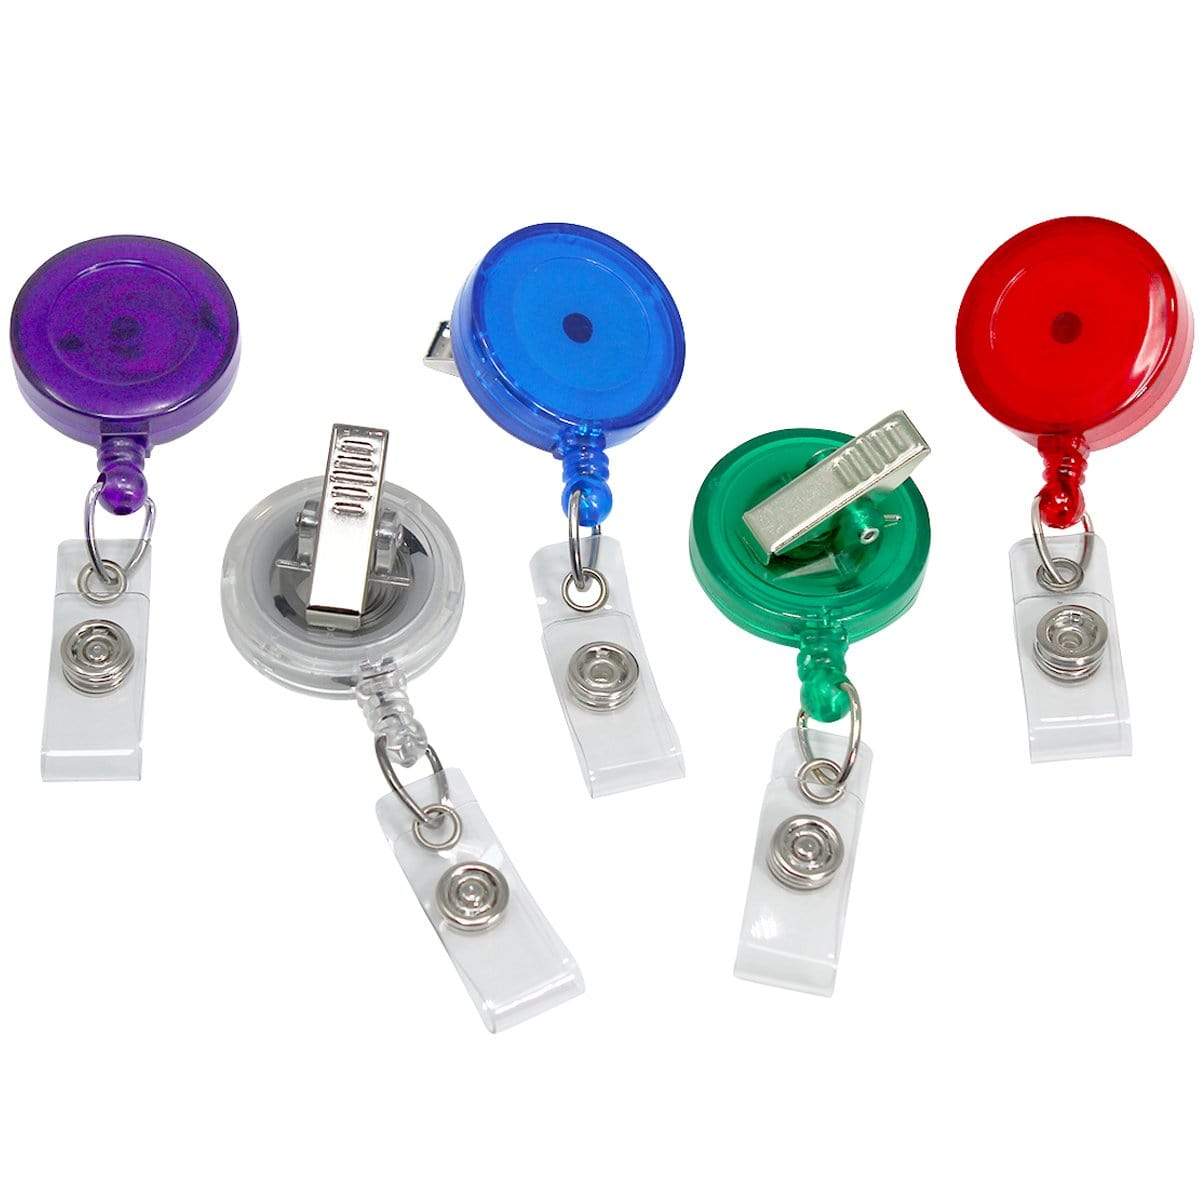 Translucent Badge Reel With Swivel Clip And Vinyl Strap Clip (P/N